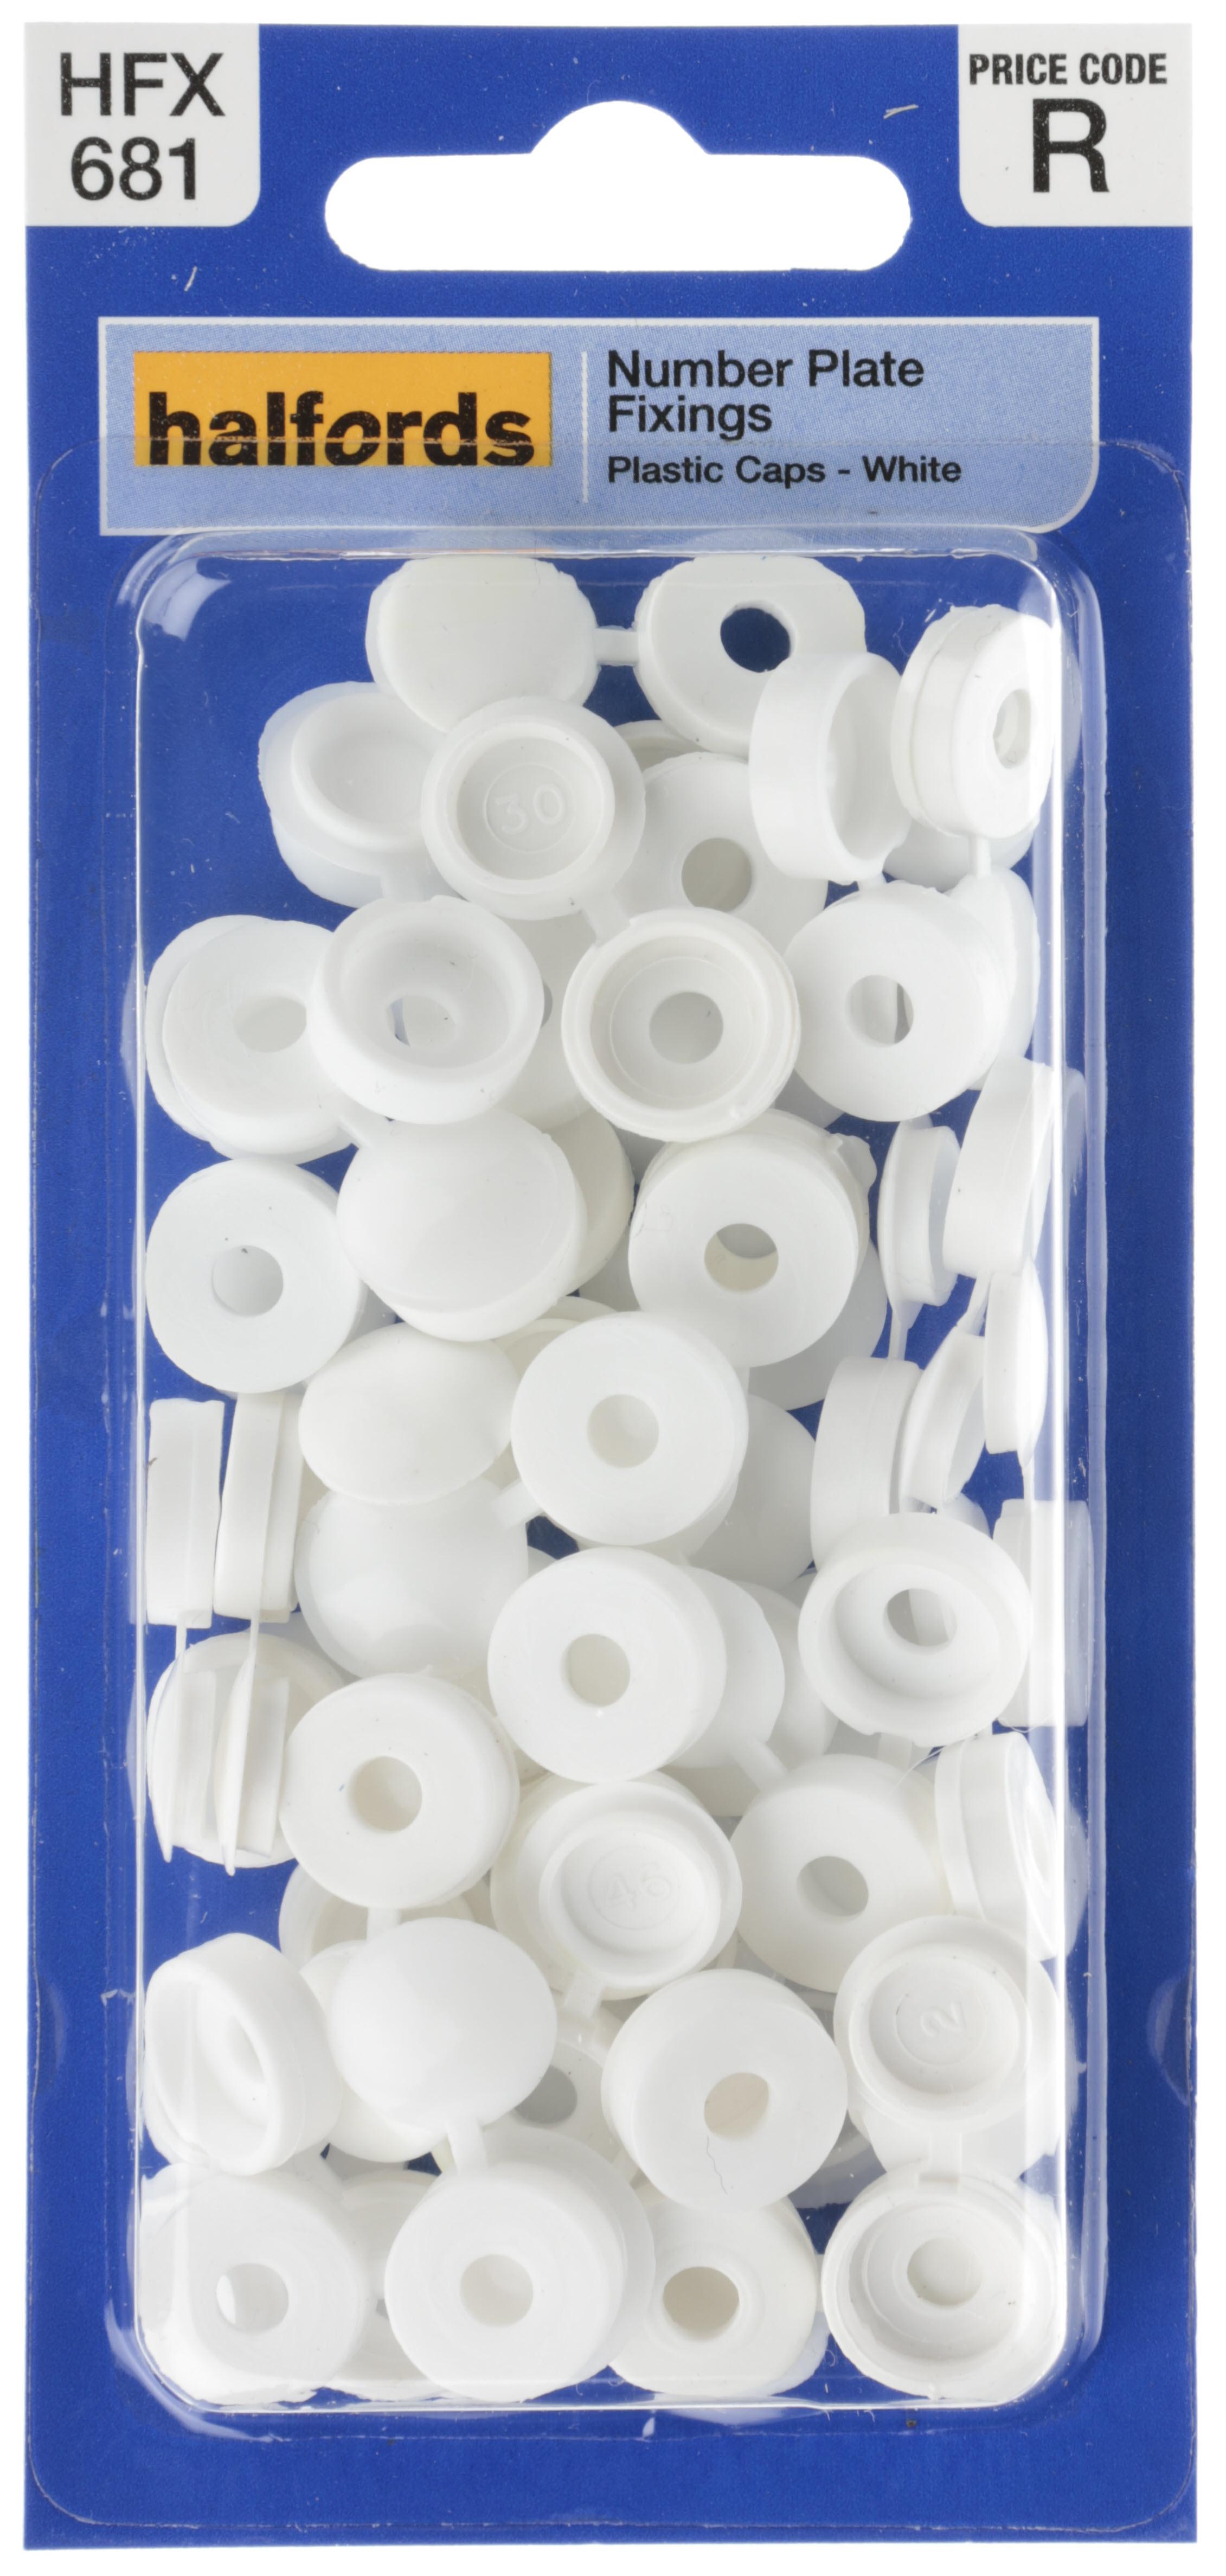 Halfords Number Plate Plastic Caps White (Hfx681)